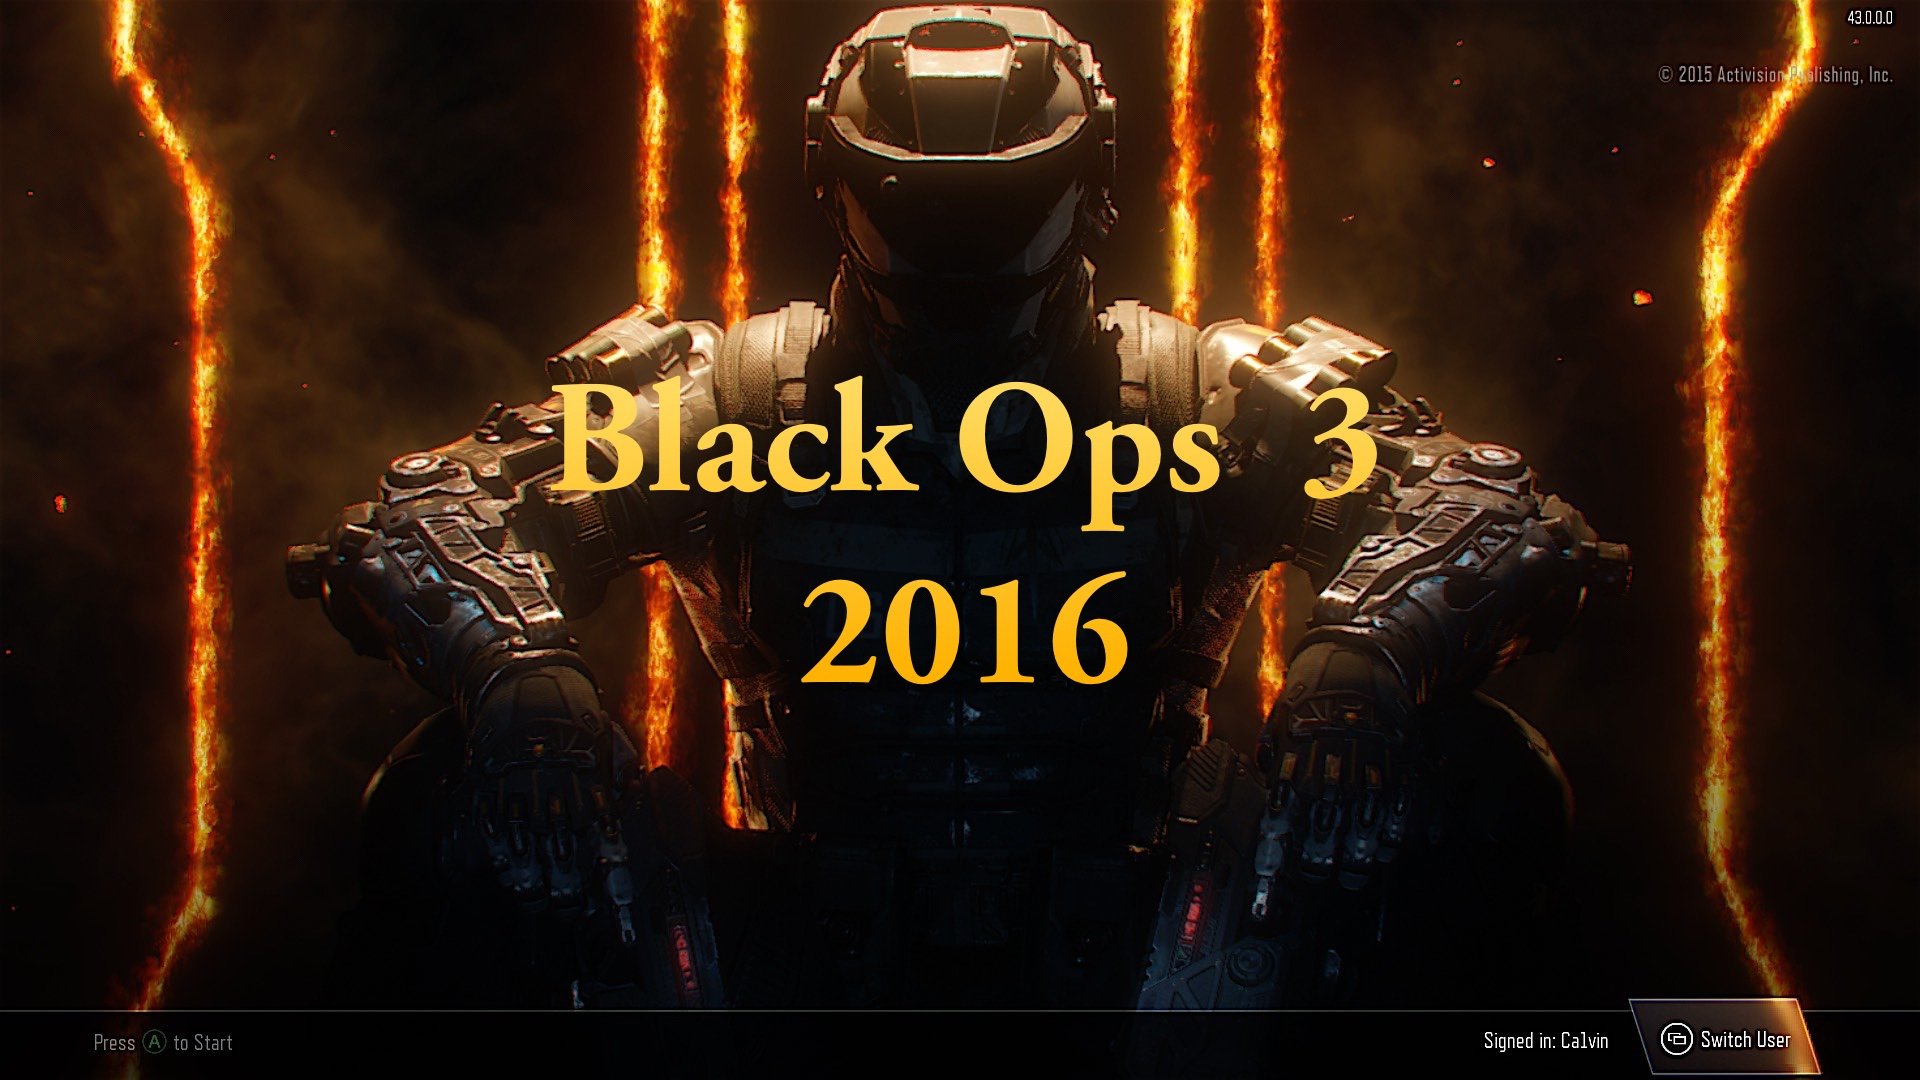 What you need to know about Black Ops 3 in 2016.